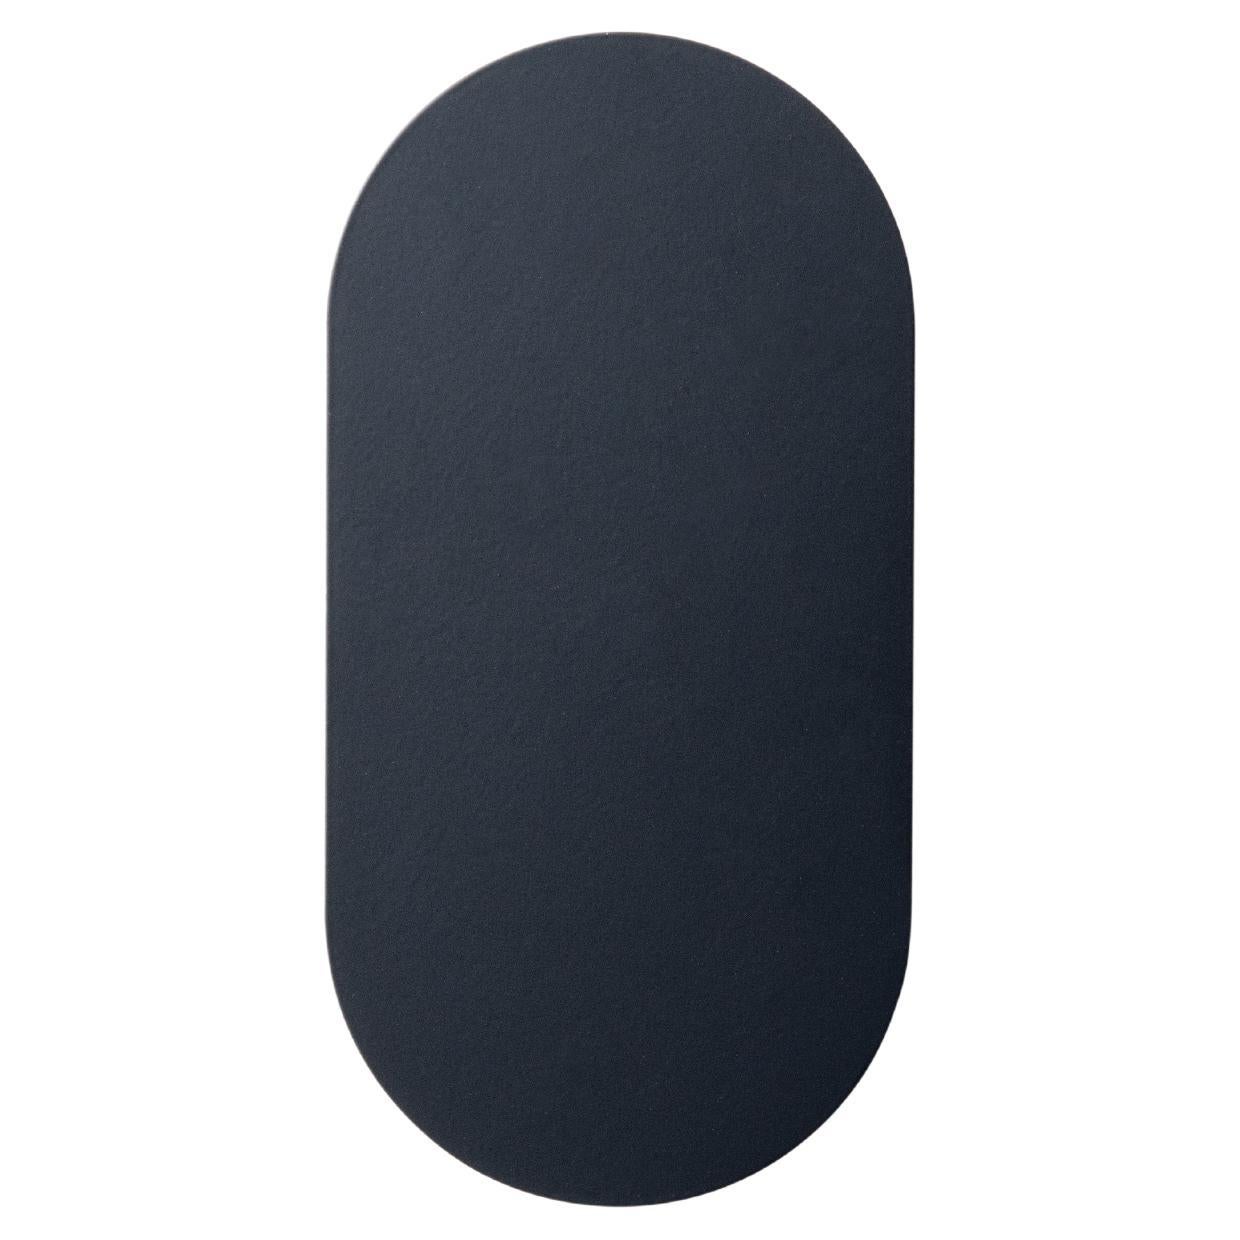 houseof Charcoal Grey Mini Diffuser Wall Light For Sale